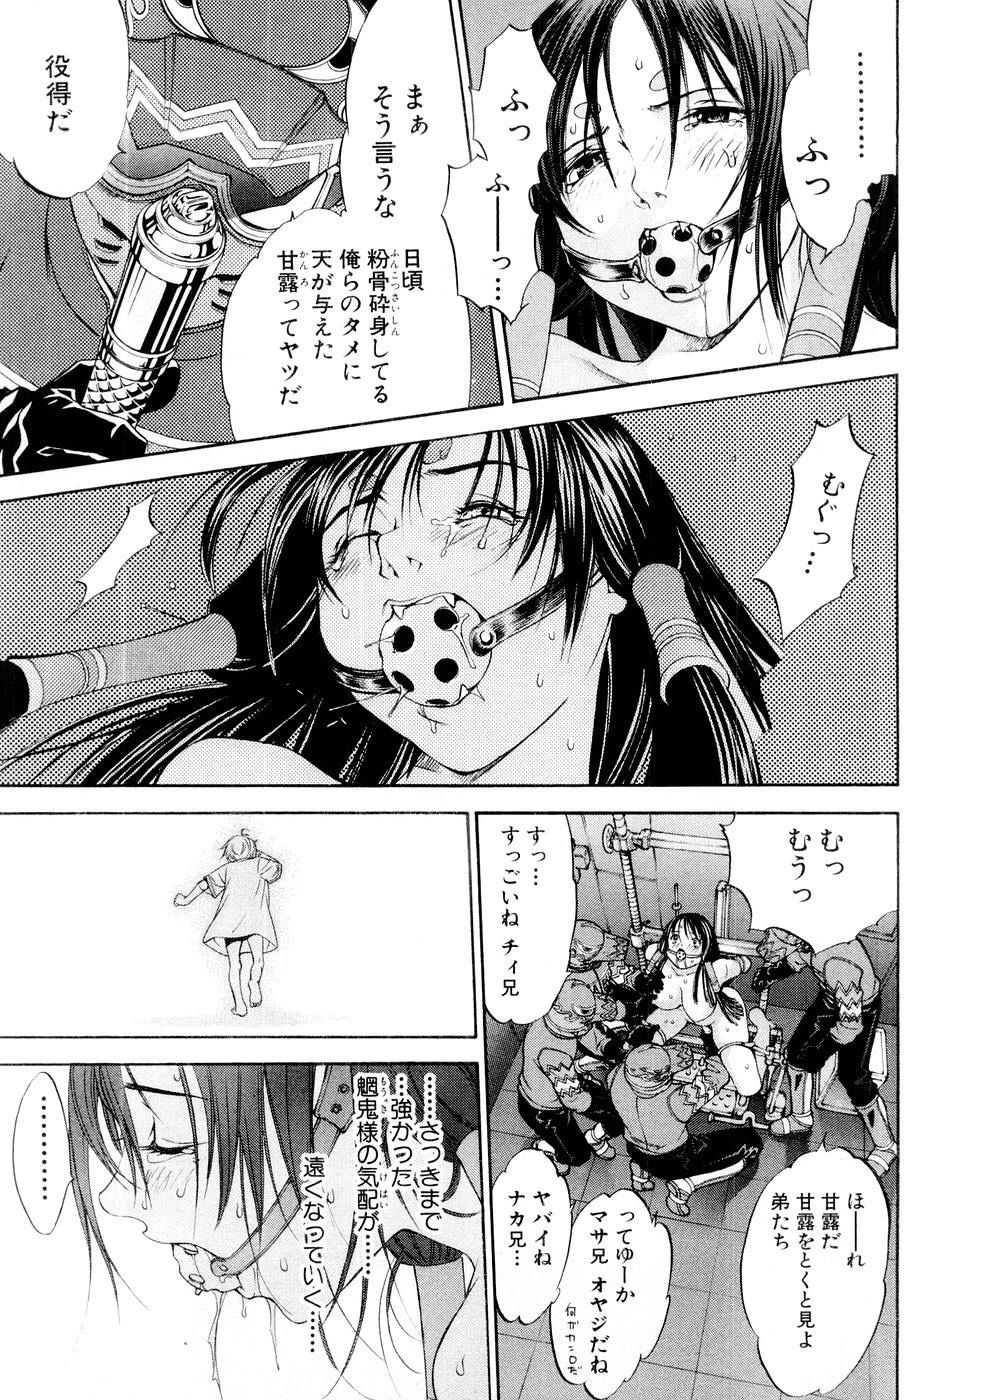 【Image】General manga part26 with a terrible erotic scene 13